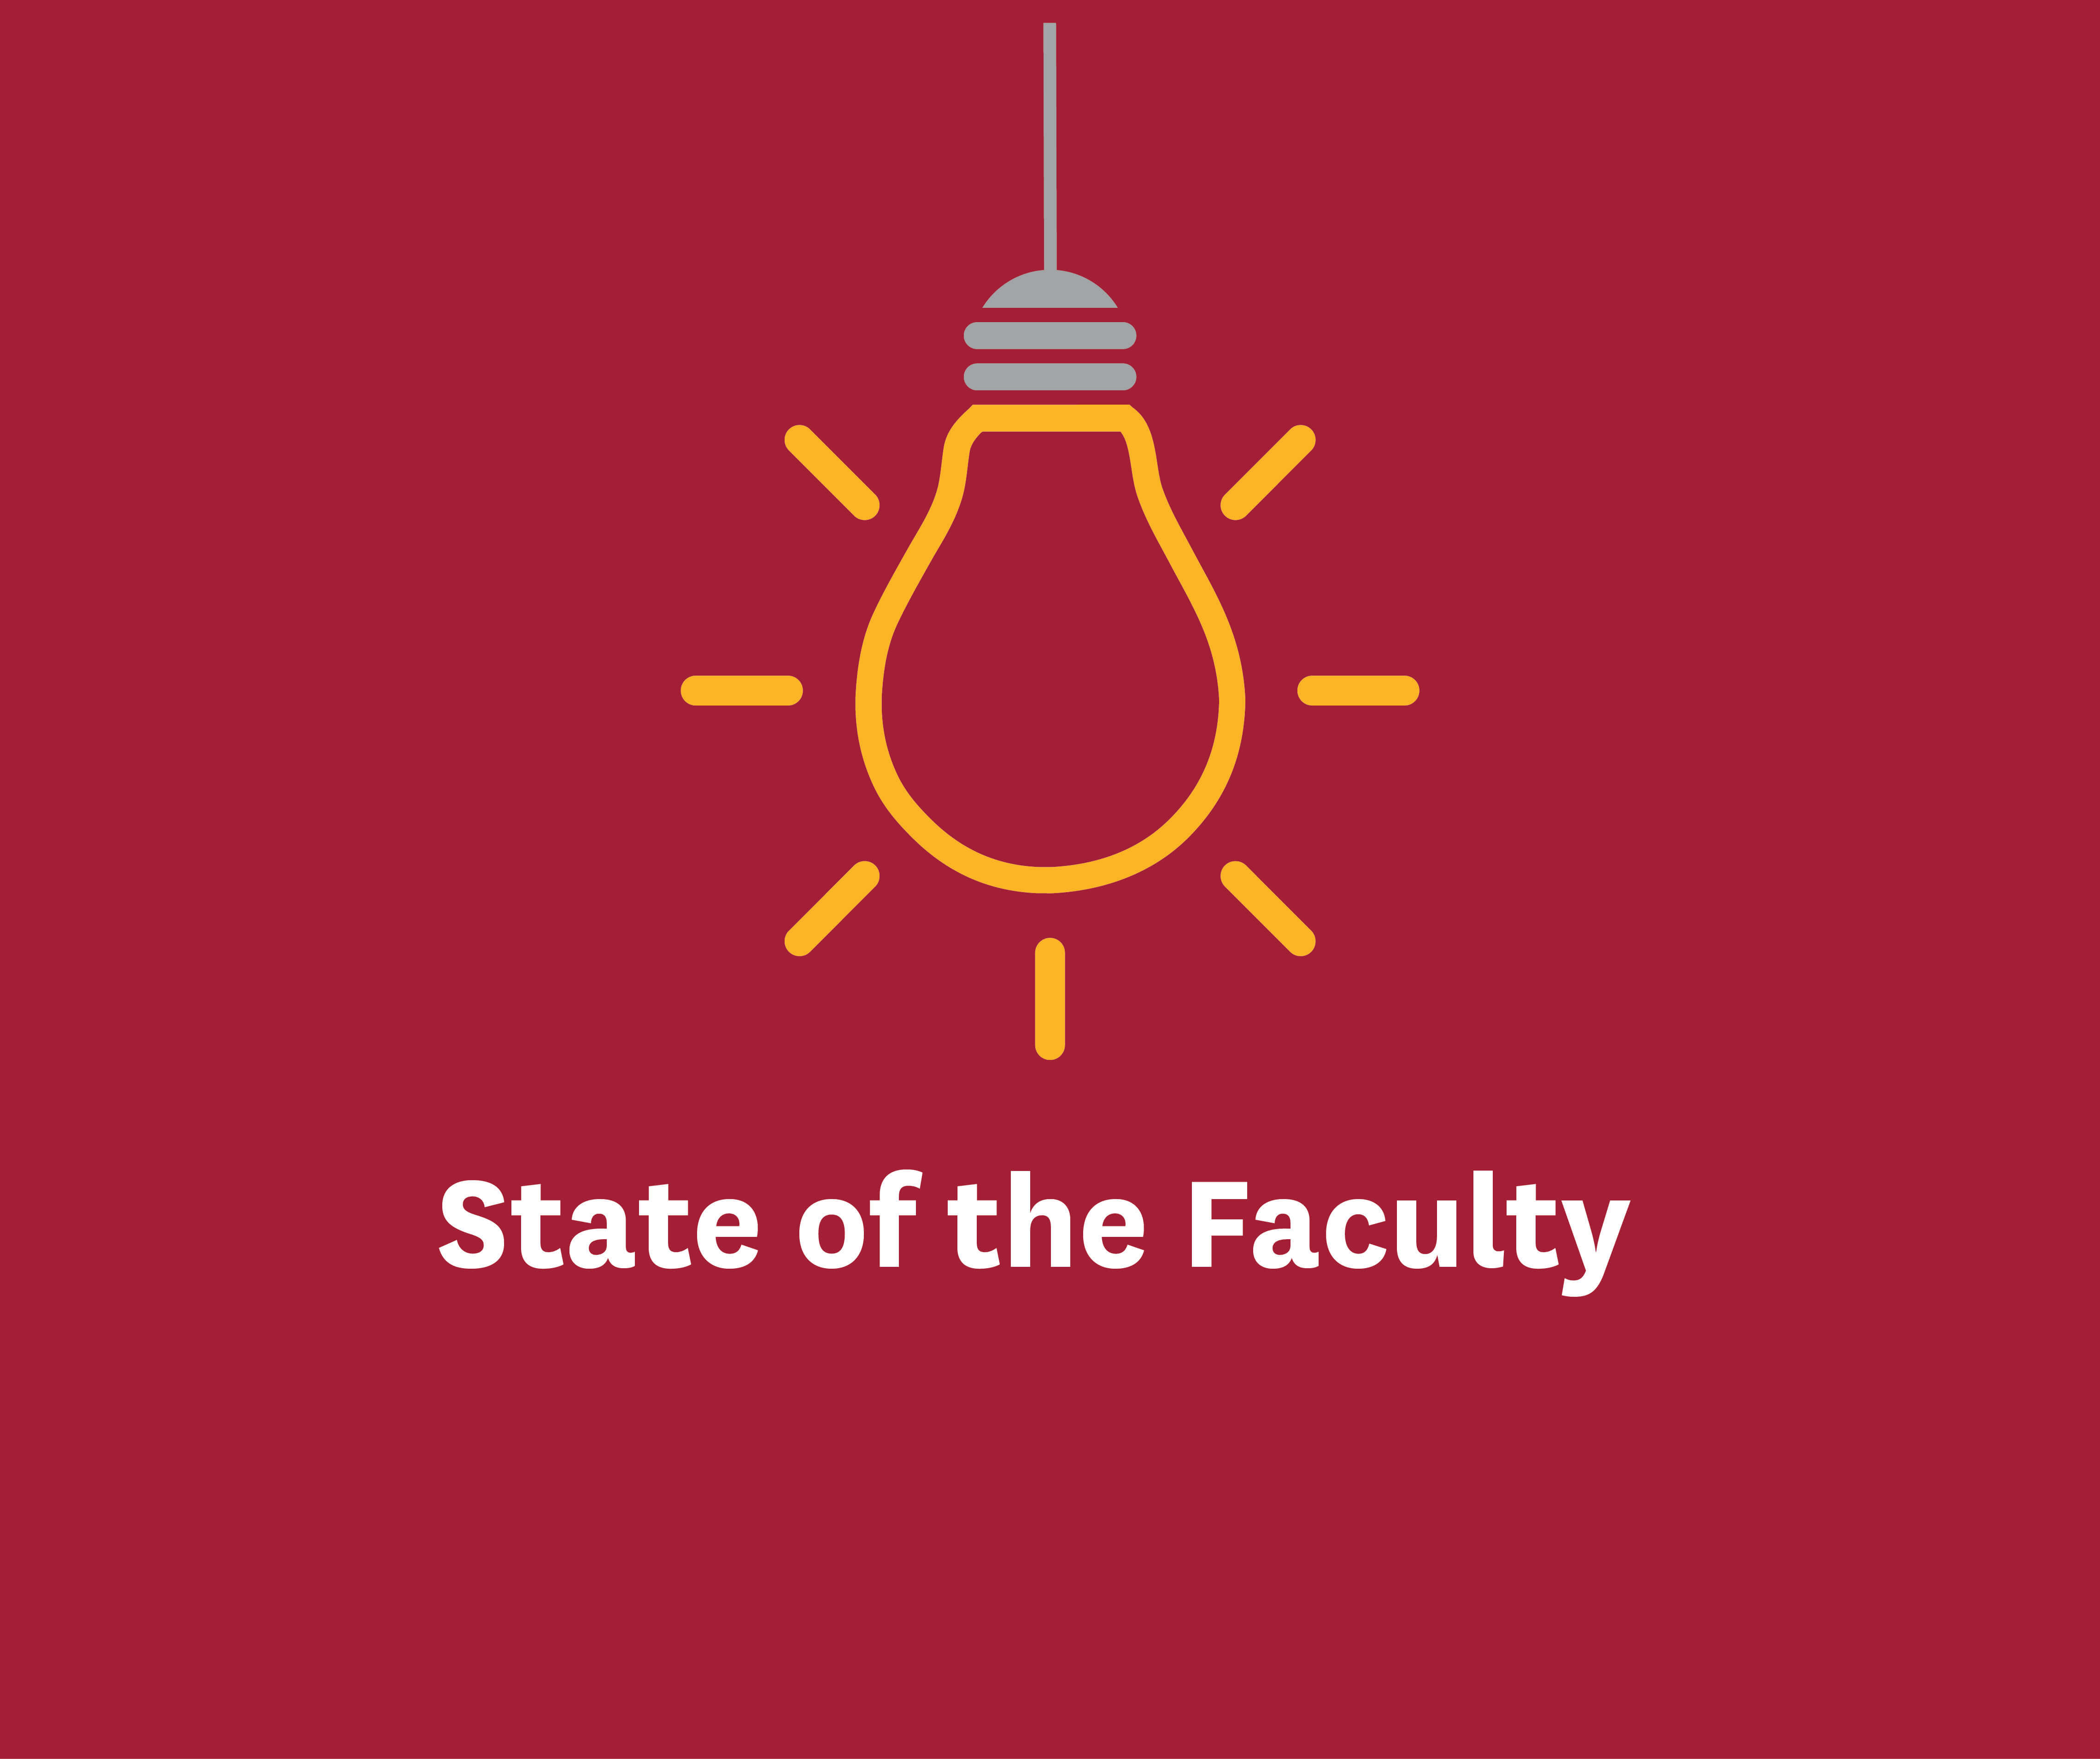 New ‘State of the Faculty’ Report Shines a Light on Faculty Trends and Issues